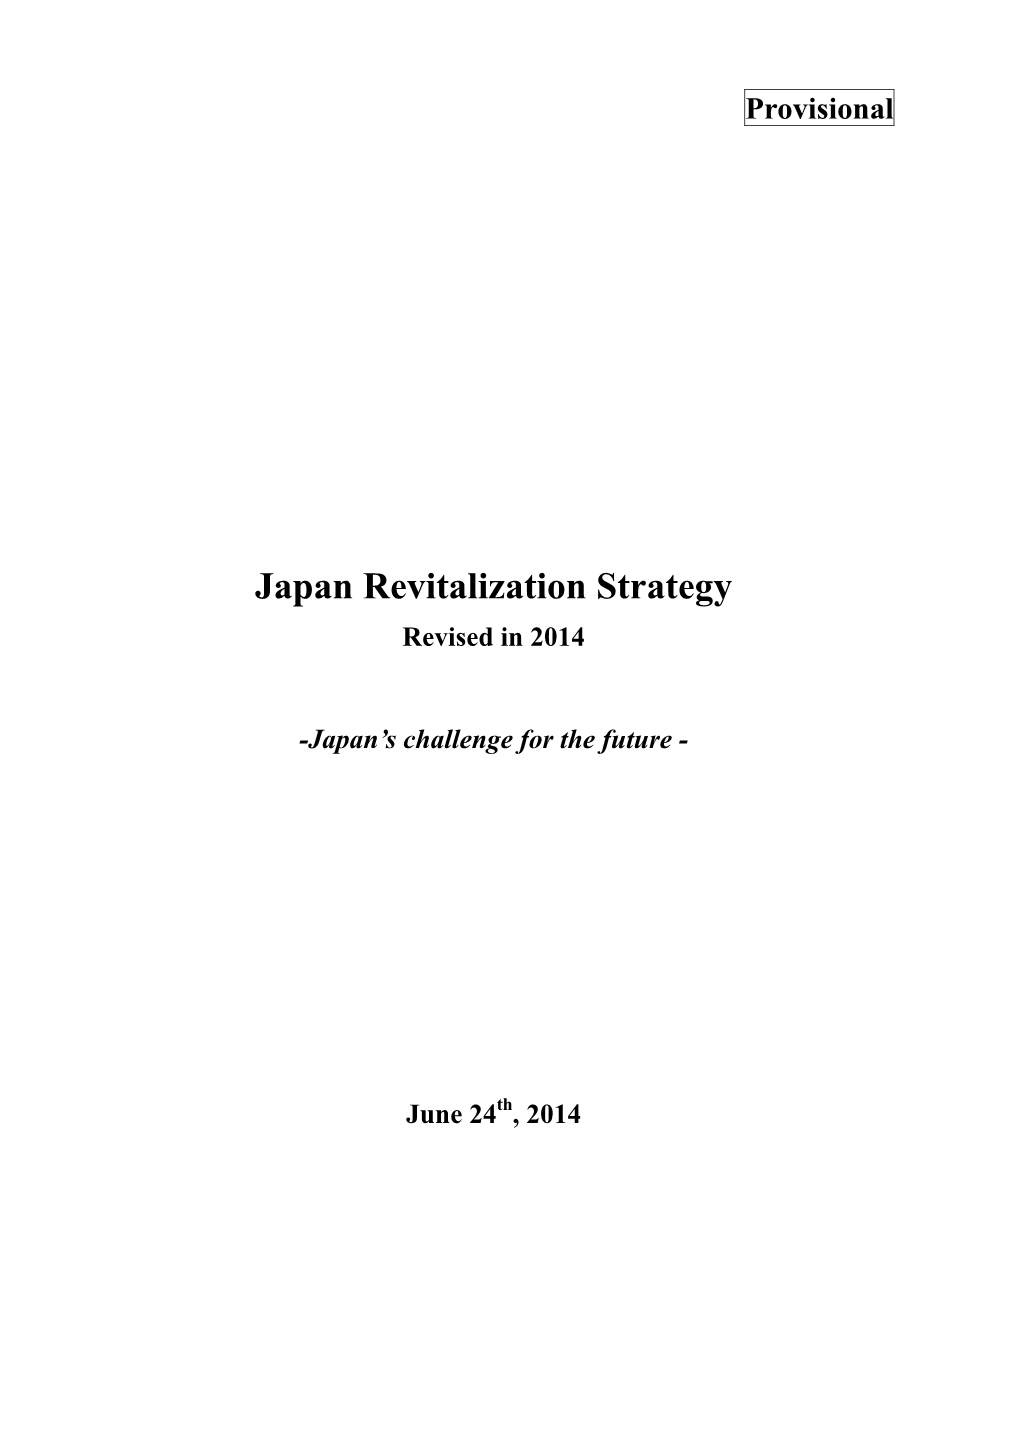 Japan Revitalization Strategy (Revised in 2014)